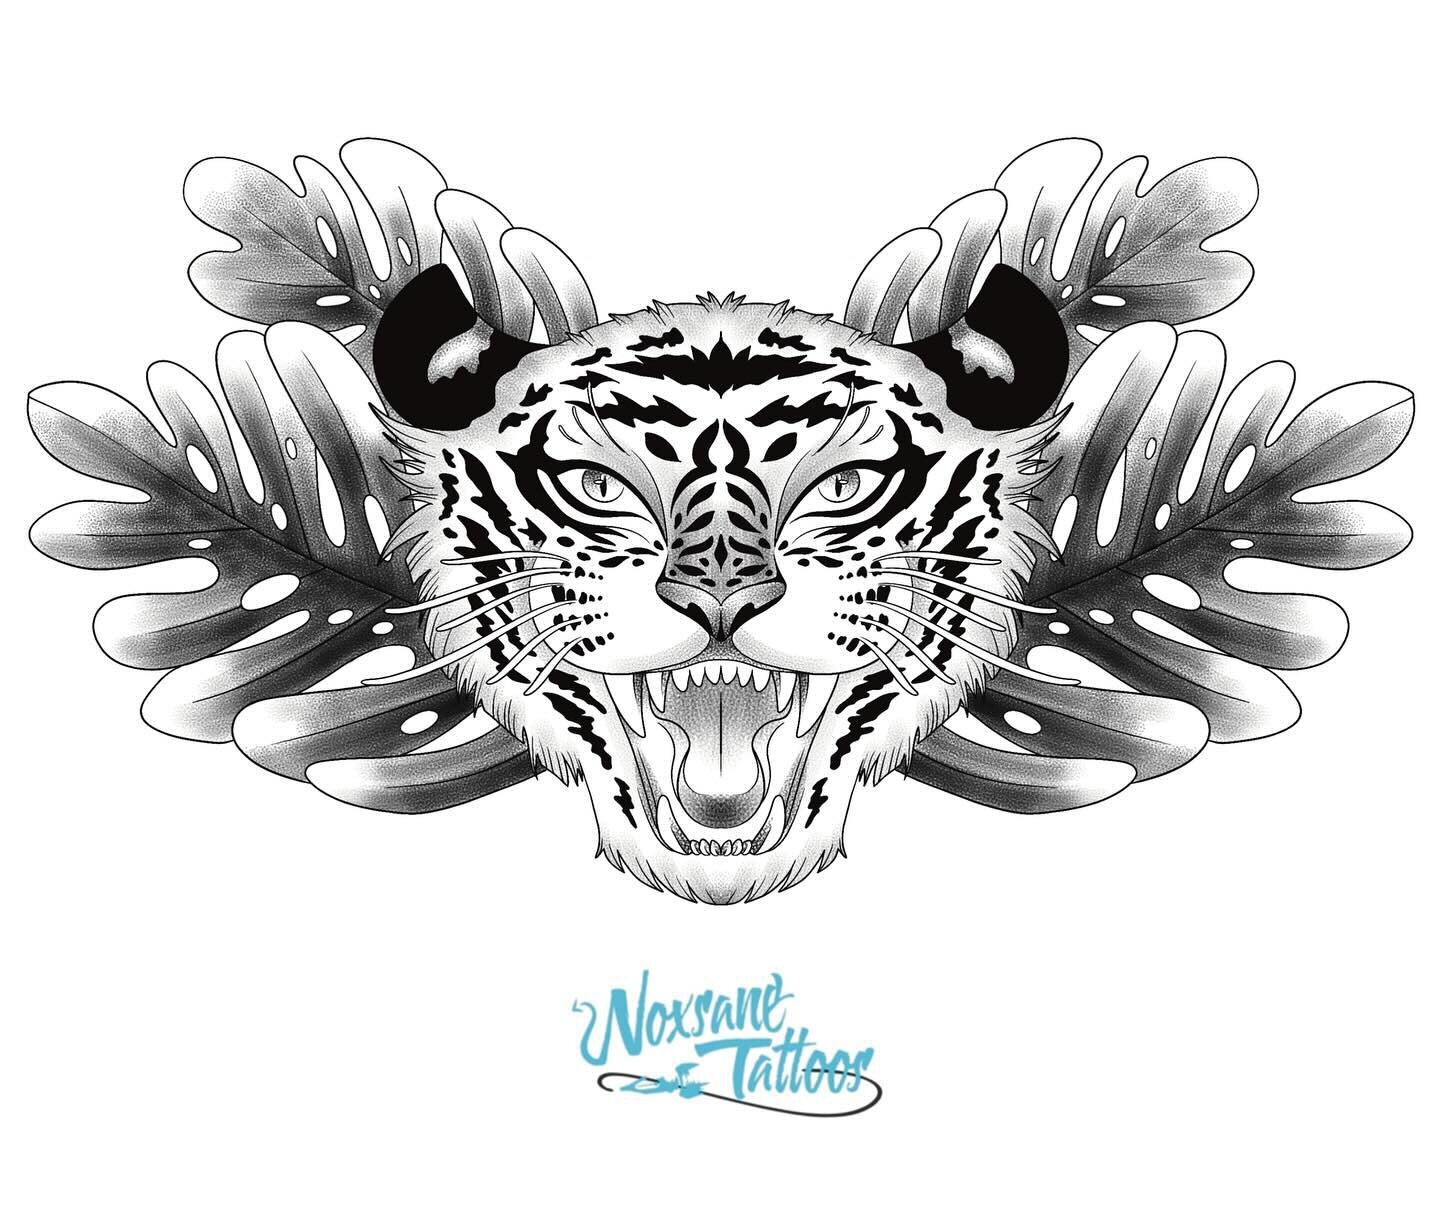 Available black and grey illustrative chest piece tiger with monster leaves! To claim, please email noxsanetattoos@gmail.com!! 🐅 #queer #queerart #queerartist #queertattooer #queertattooartist #qttr #milwaukee #milwaukeetattoo #milwaukeetattoos #mil